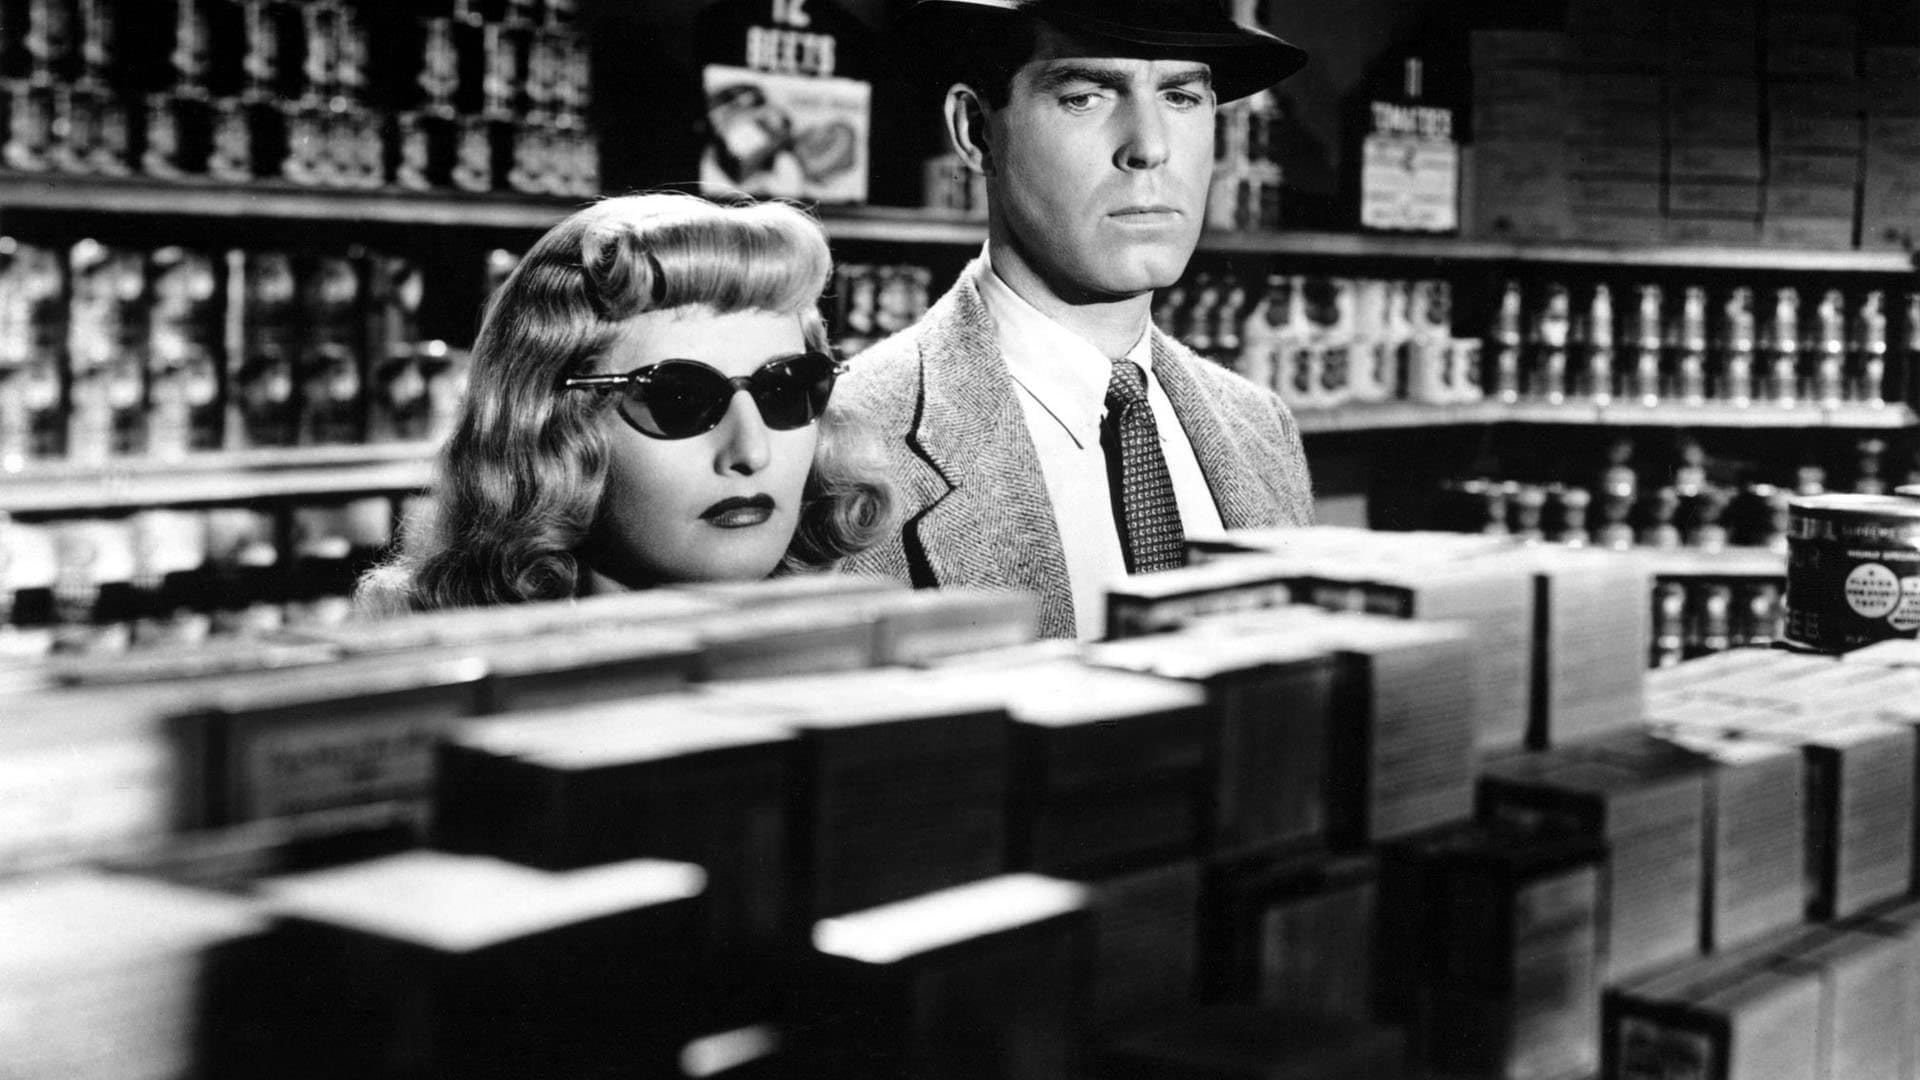 Double Indemnity 1944 123movies